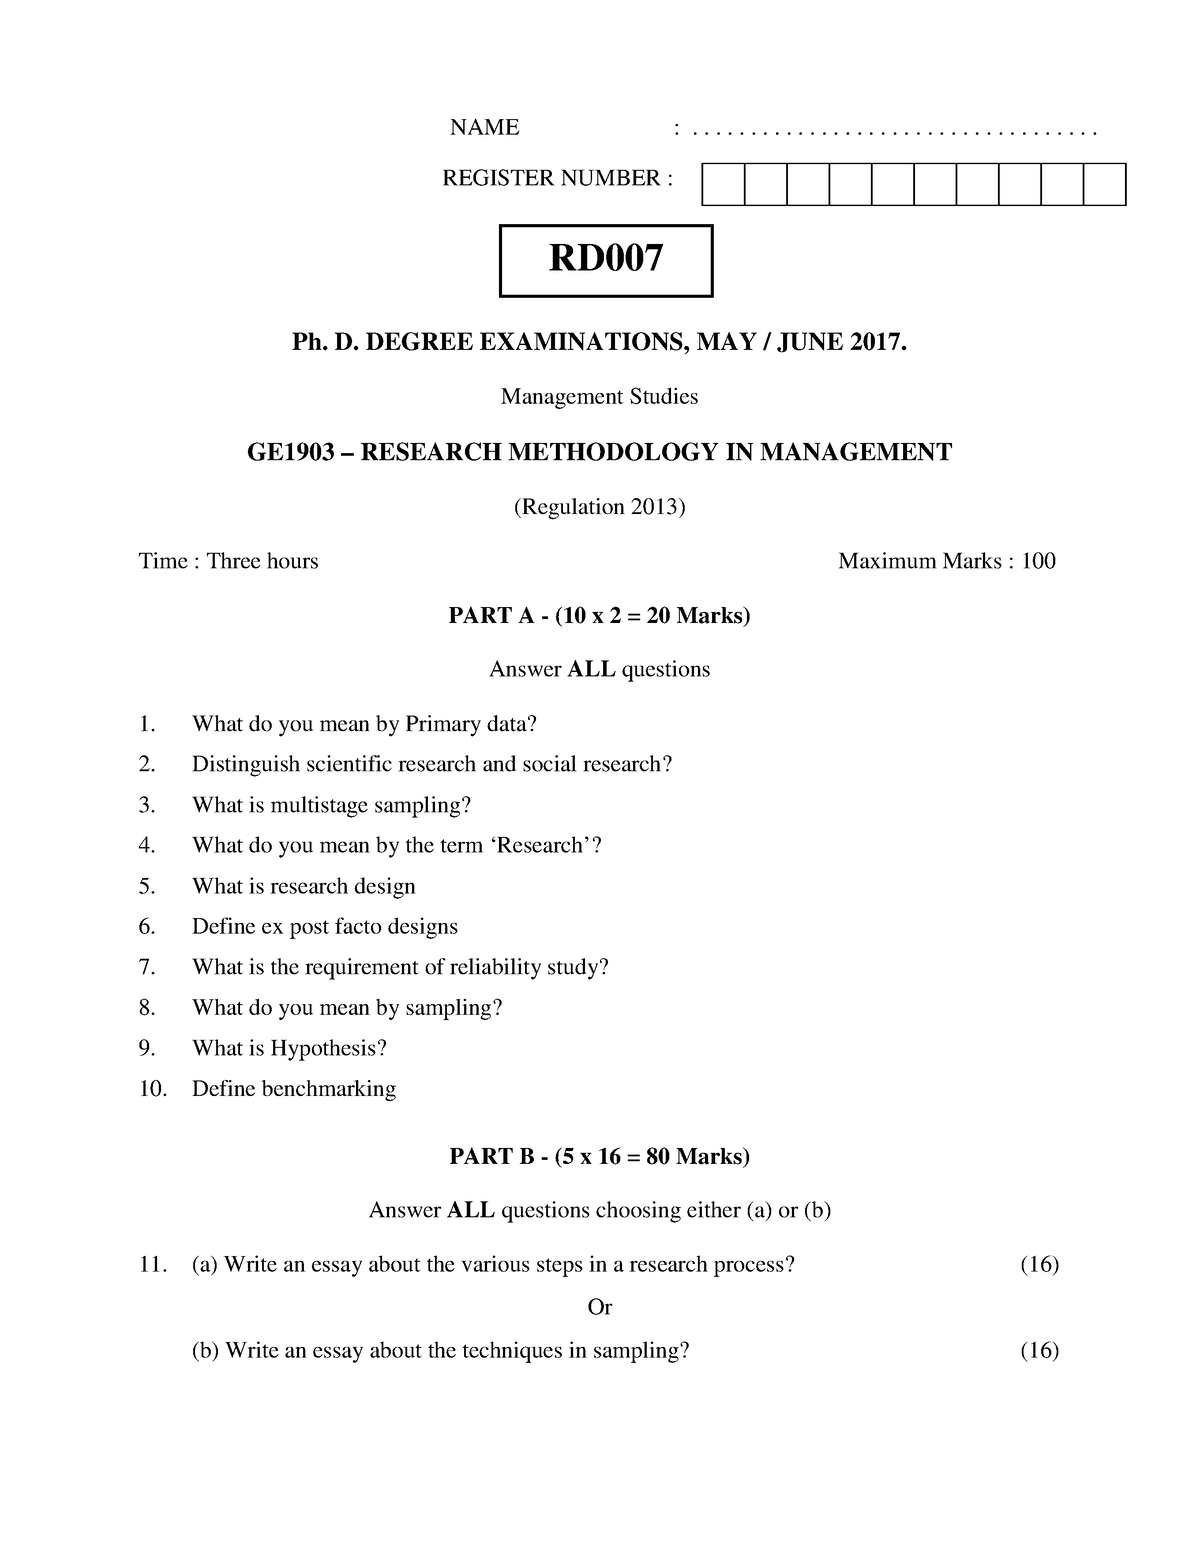 advanced research methodology question paper